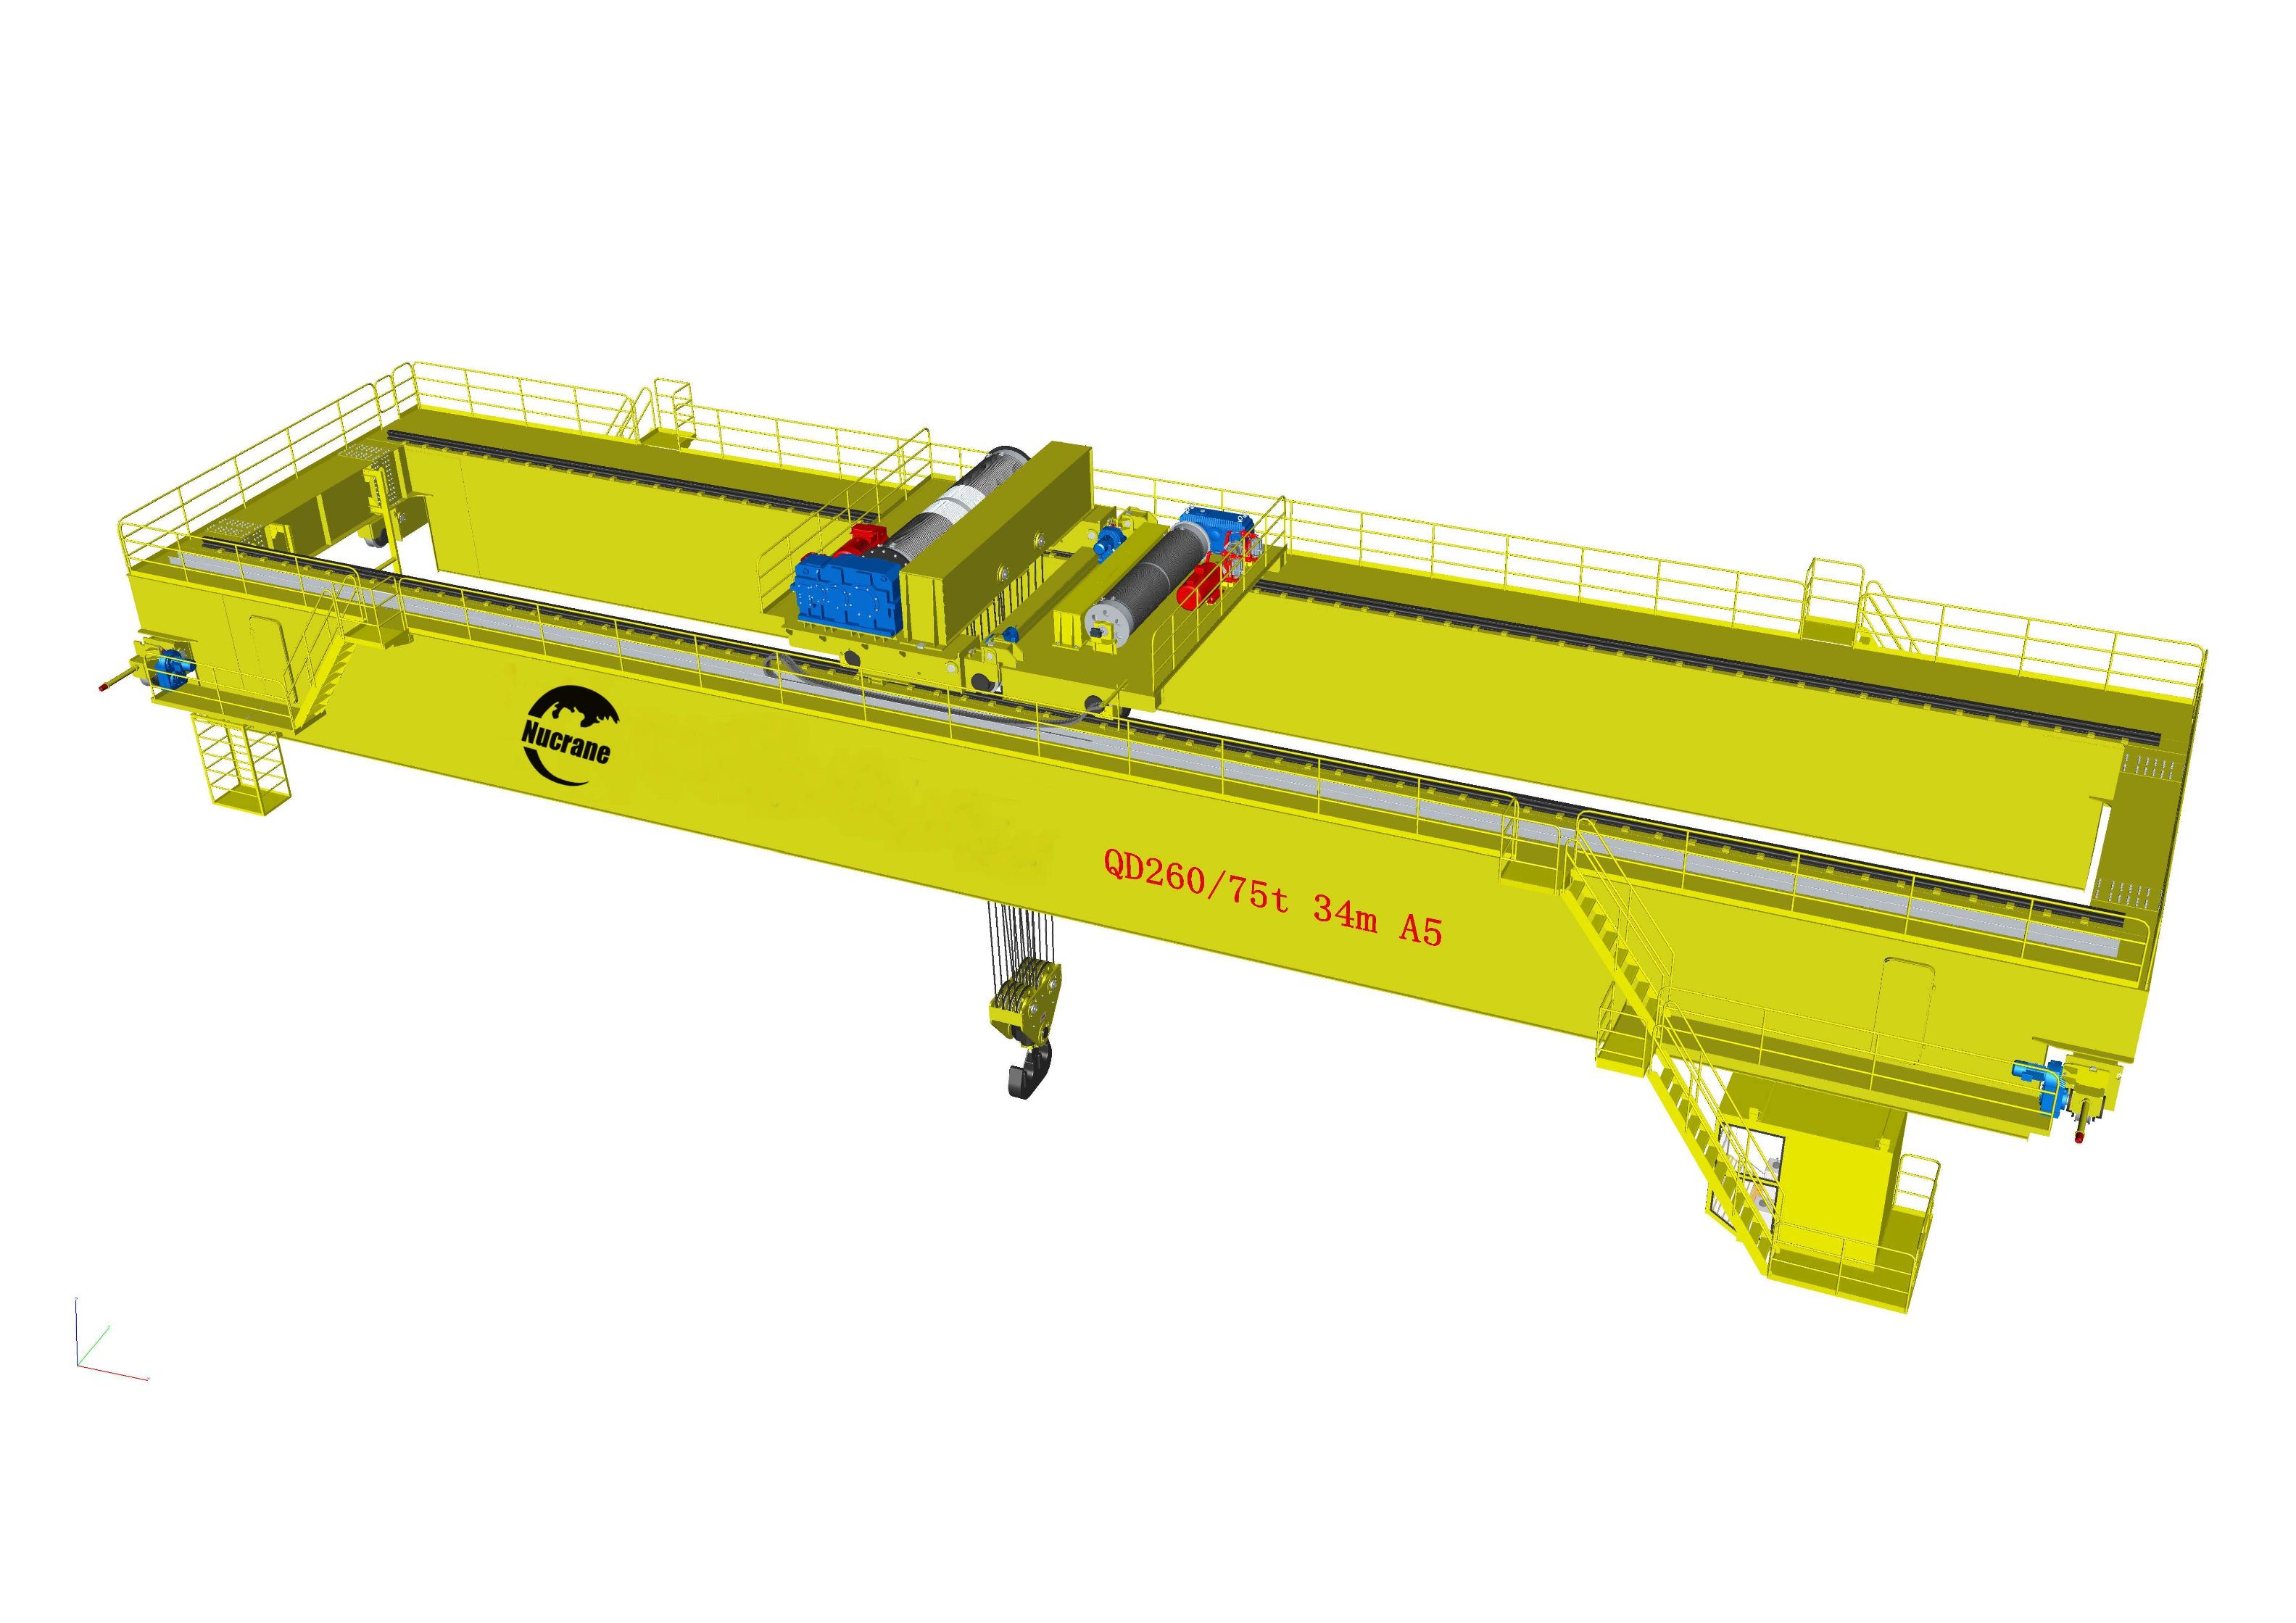 Frenquency of European Type Electric Double Girder Overhead Crane 25t